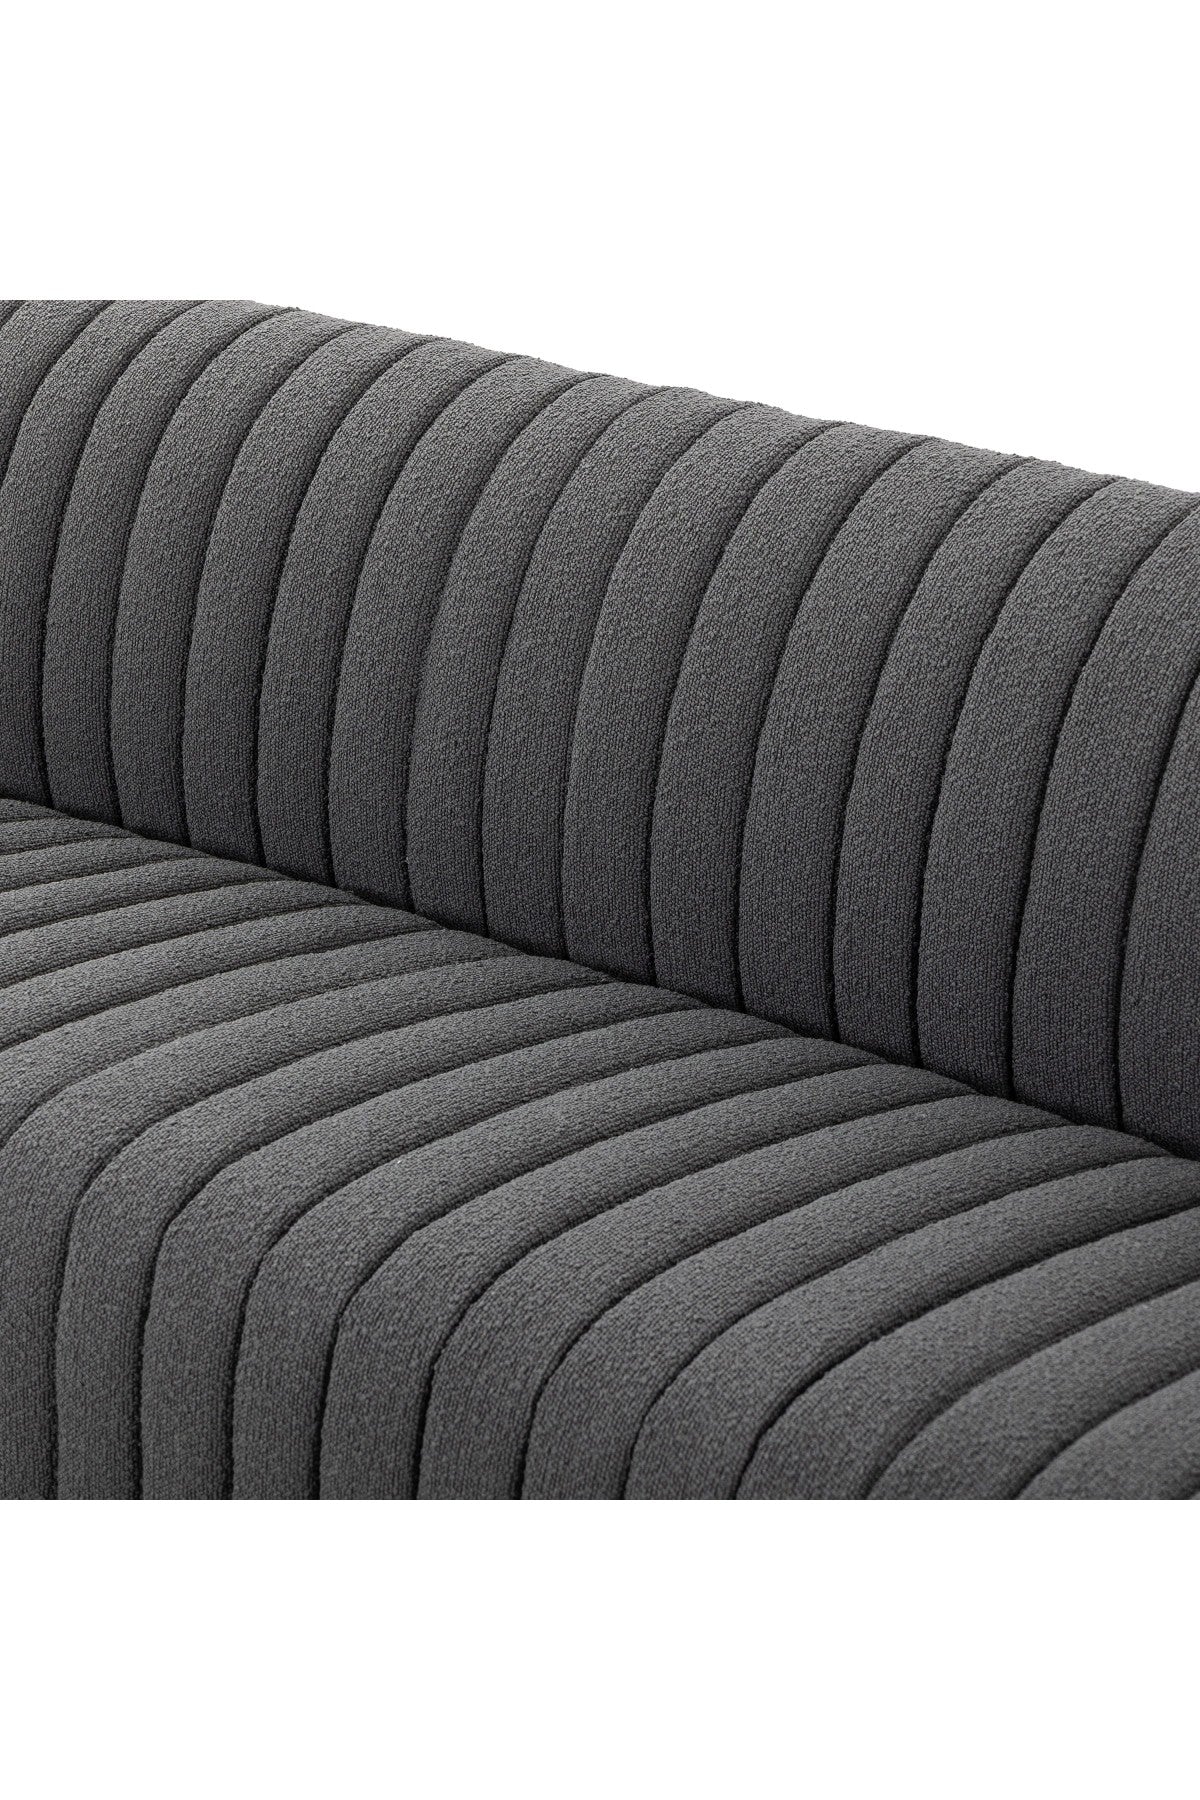 Fawkes Dining Banquette, Charcoal Boucle - Custom